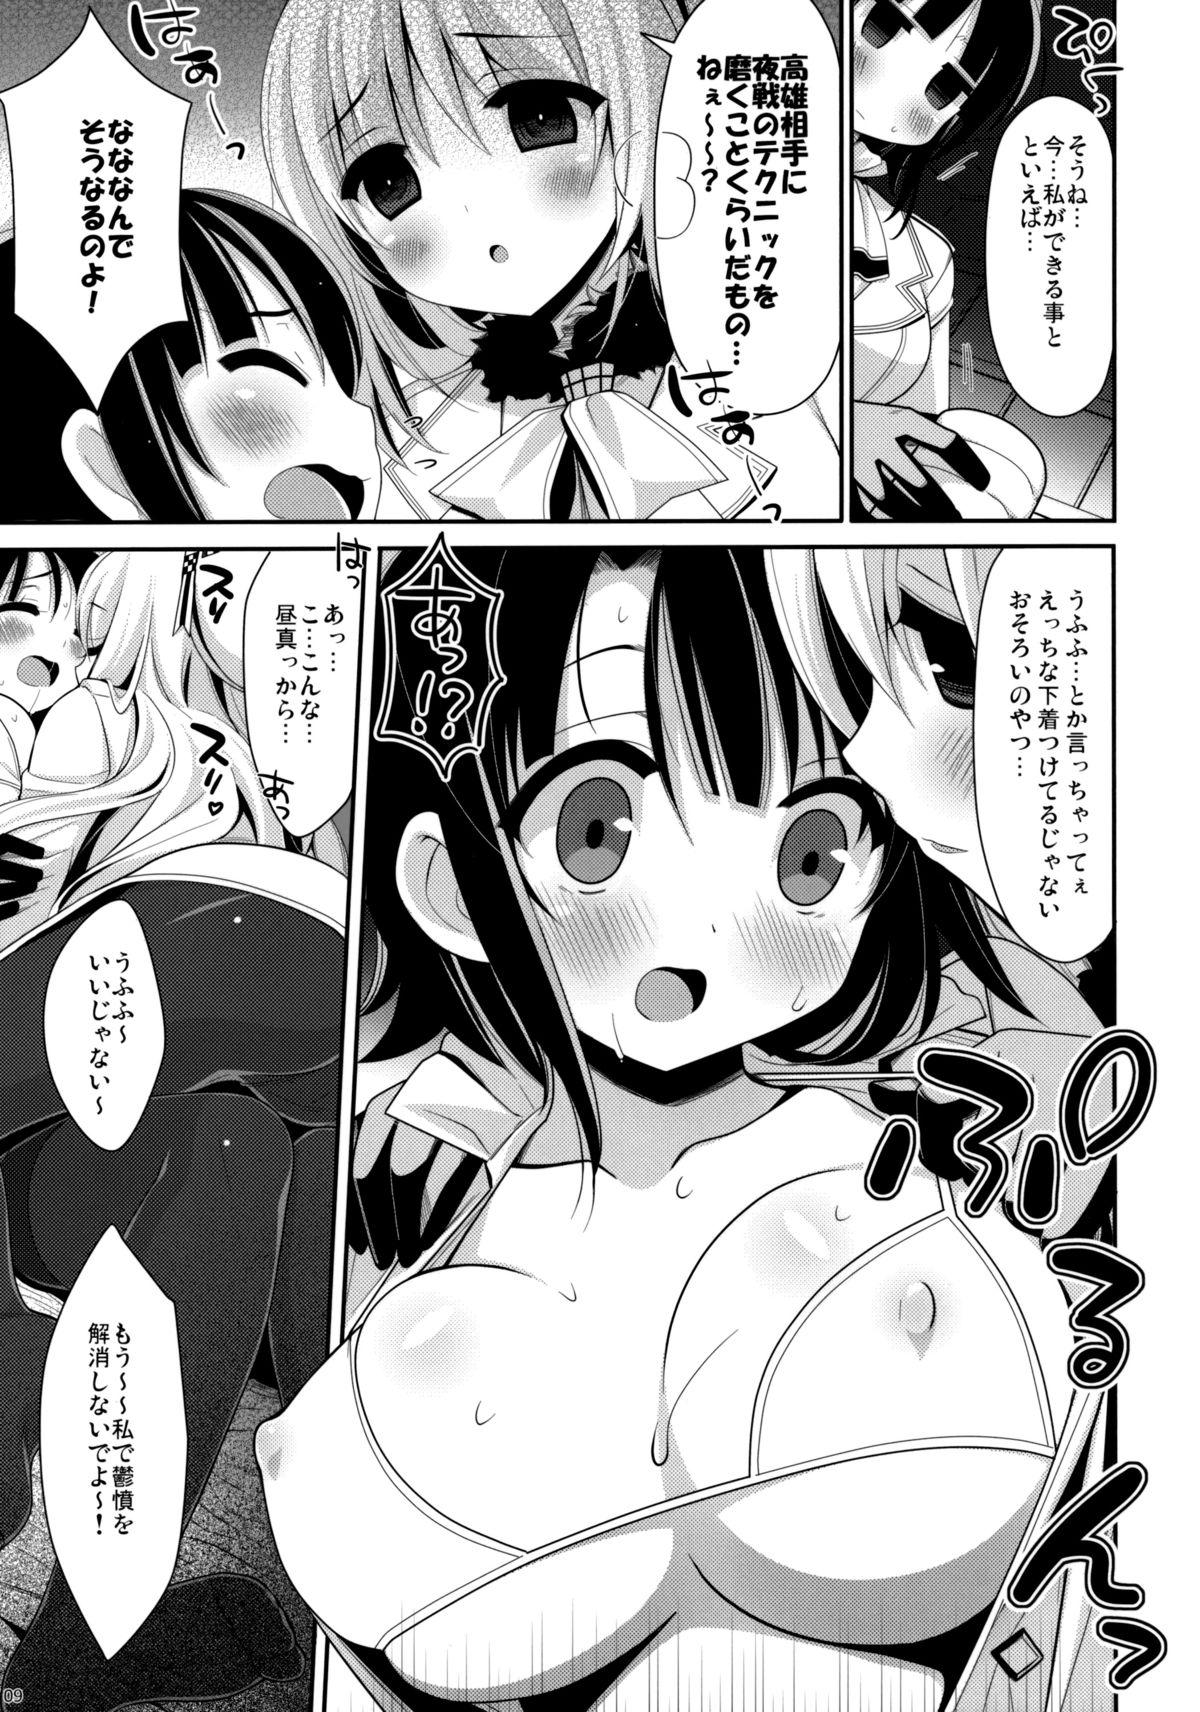 Gozo AT&T - Kantai collection Watersports - Page 9